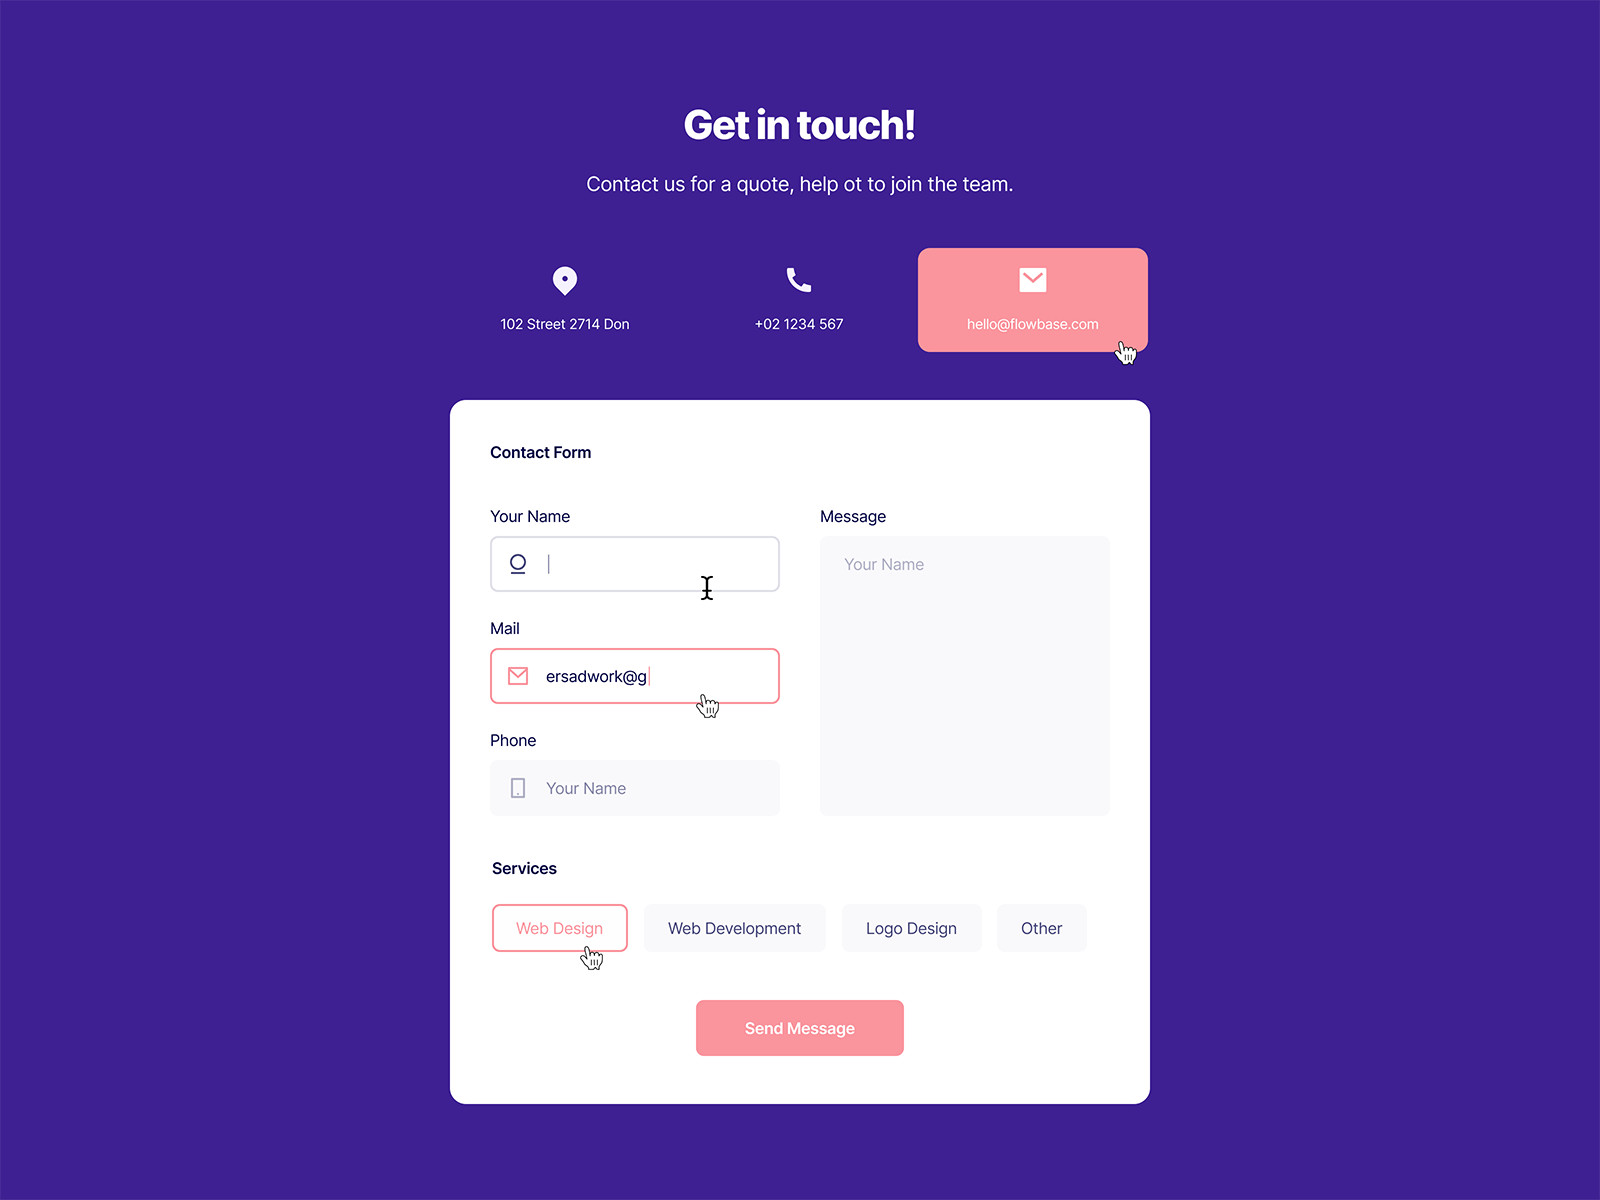 contact-form-03-by-er-ad-ba-ba-for-flowbase-on-dribbble